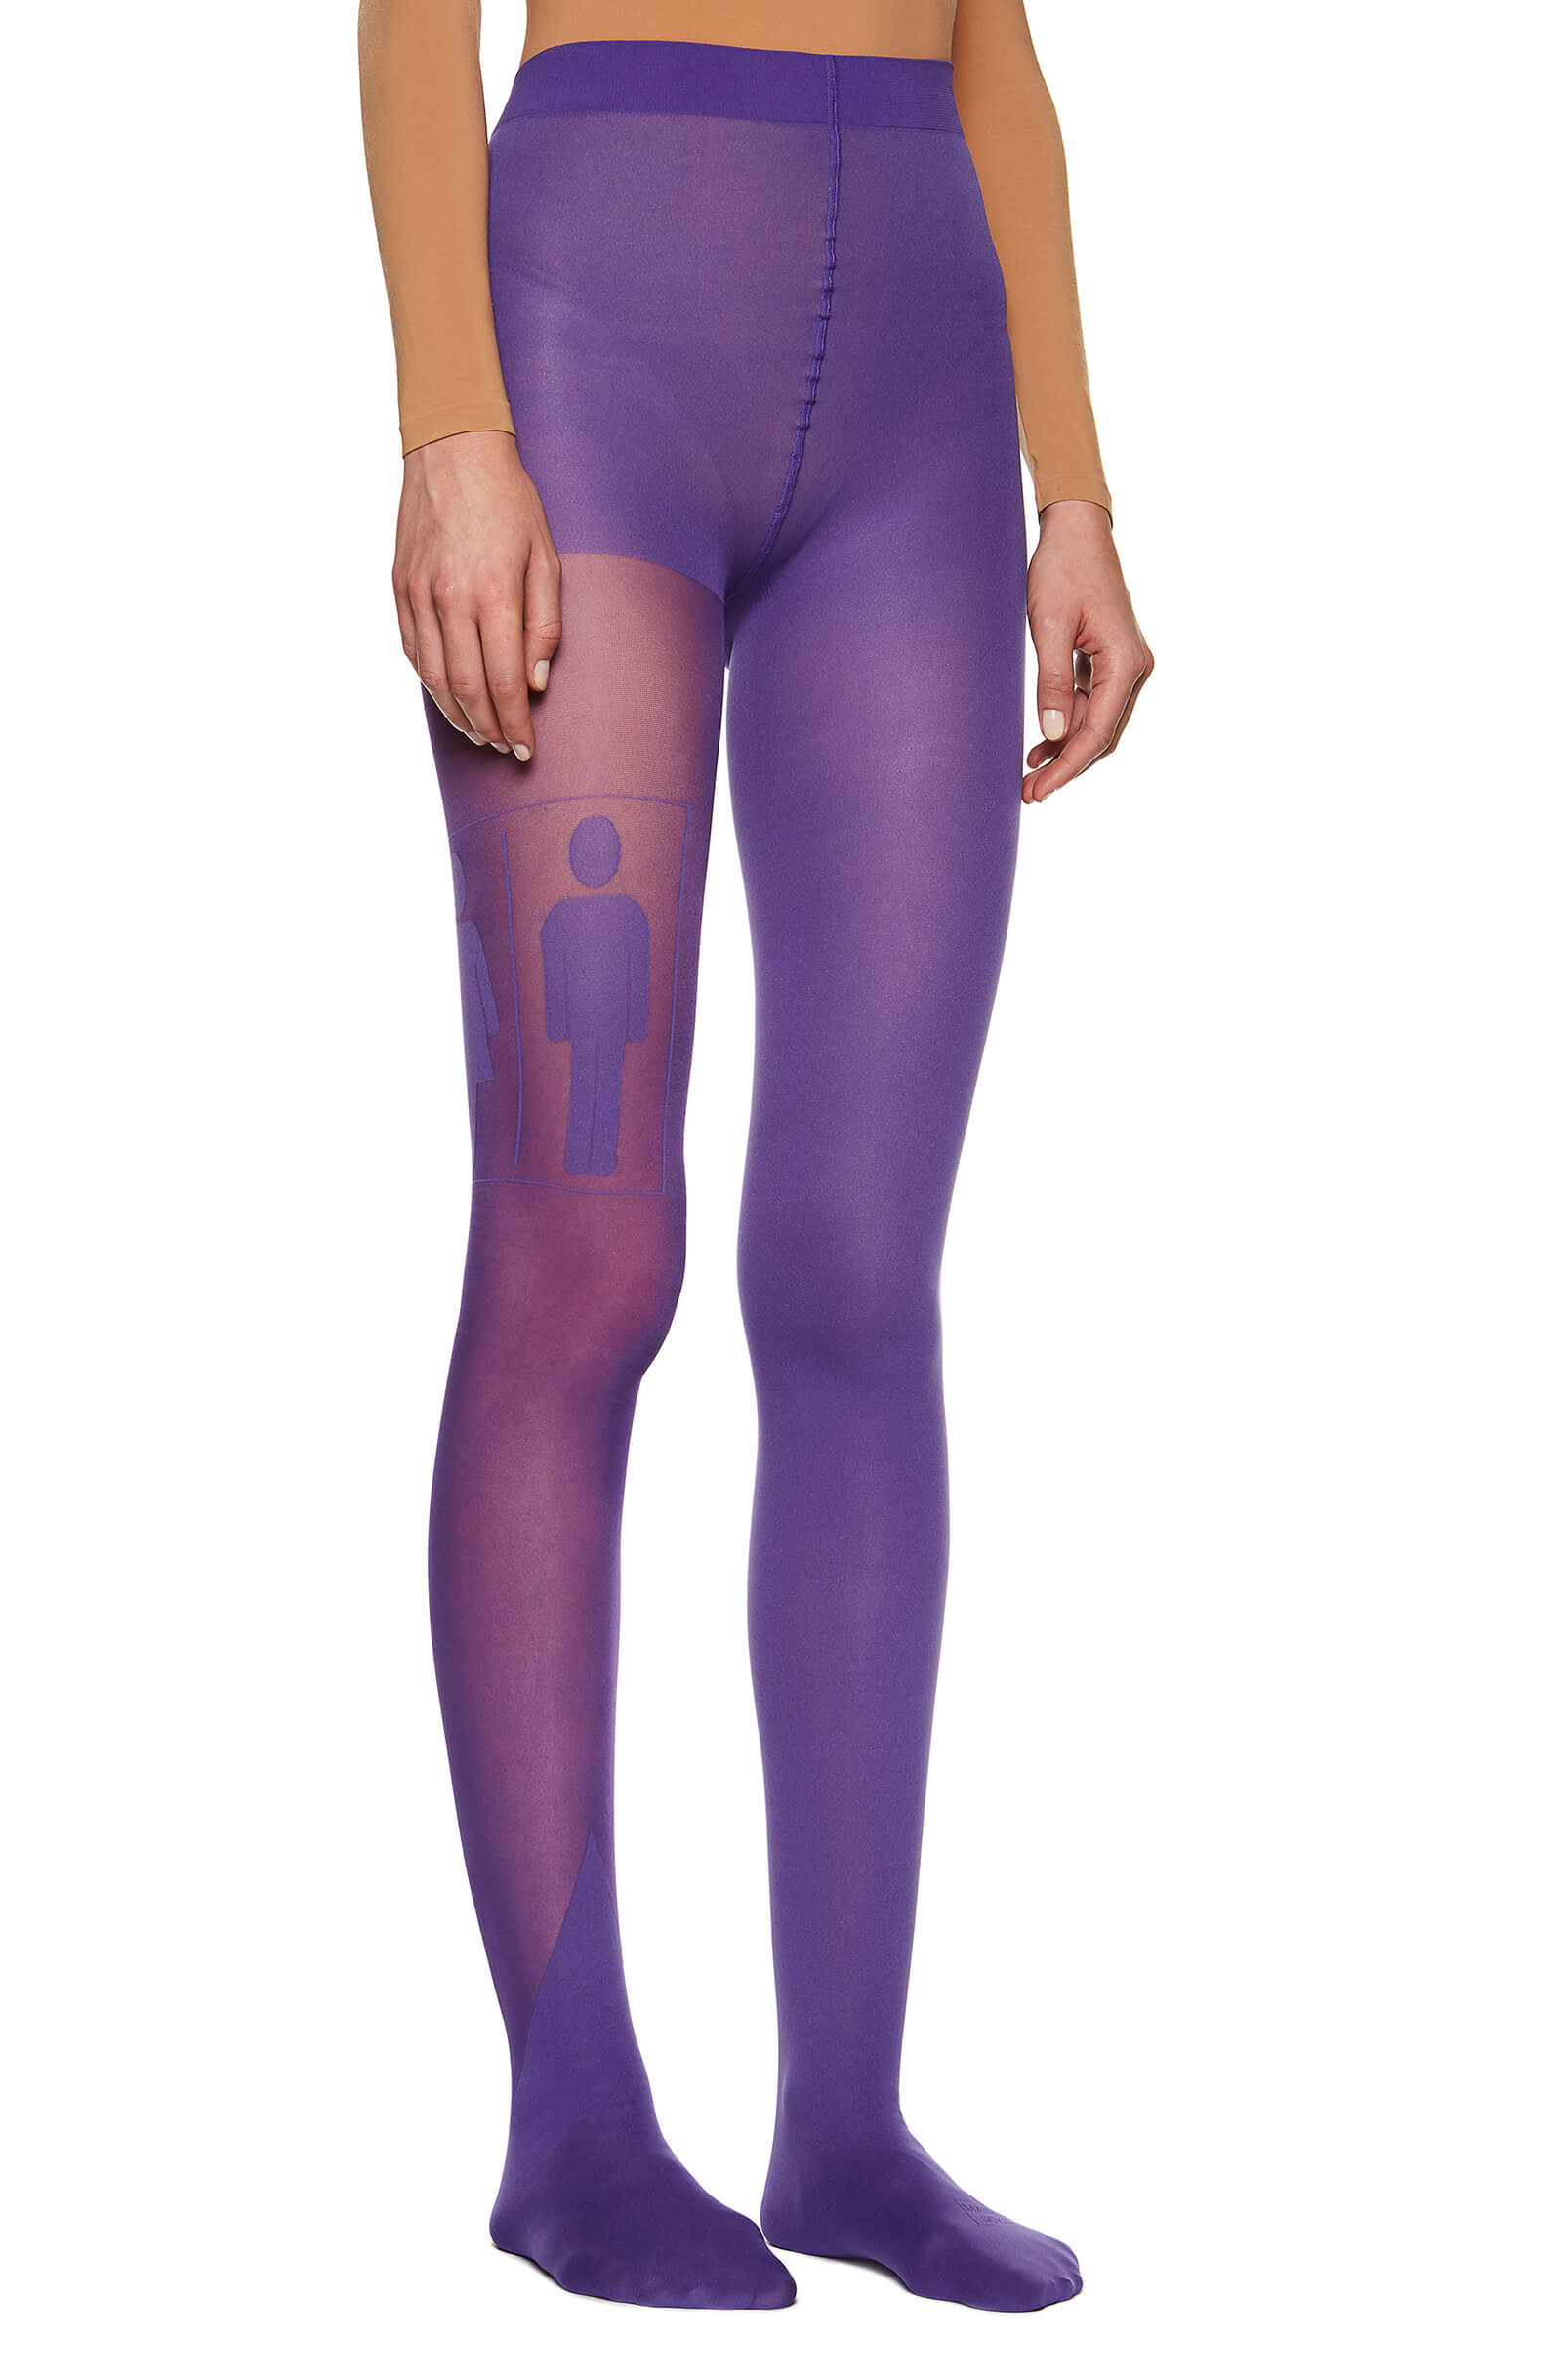 Purple Boho Chic Printed Tights Pantyhose for Women Available in